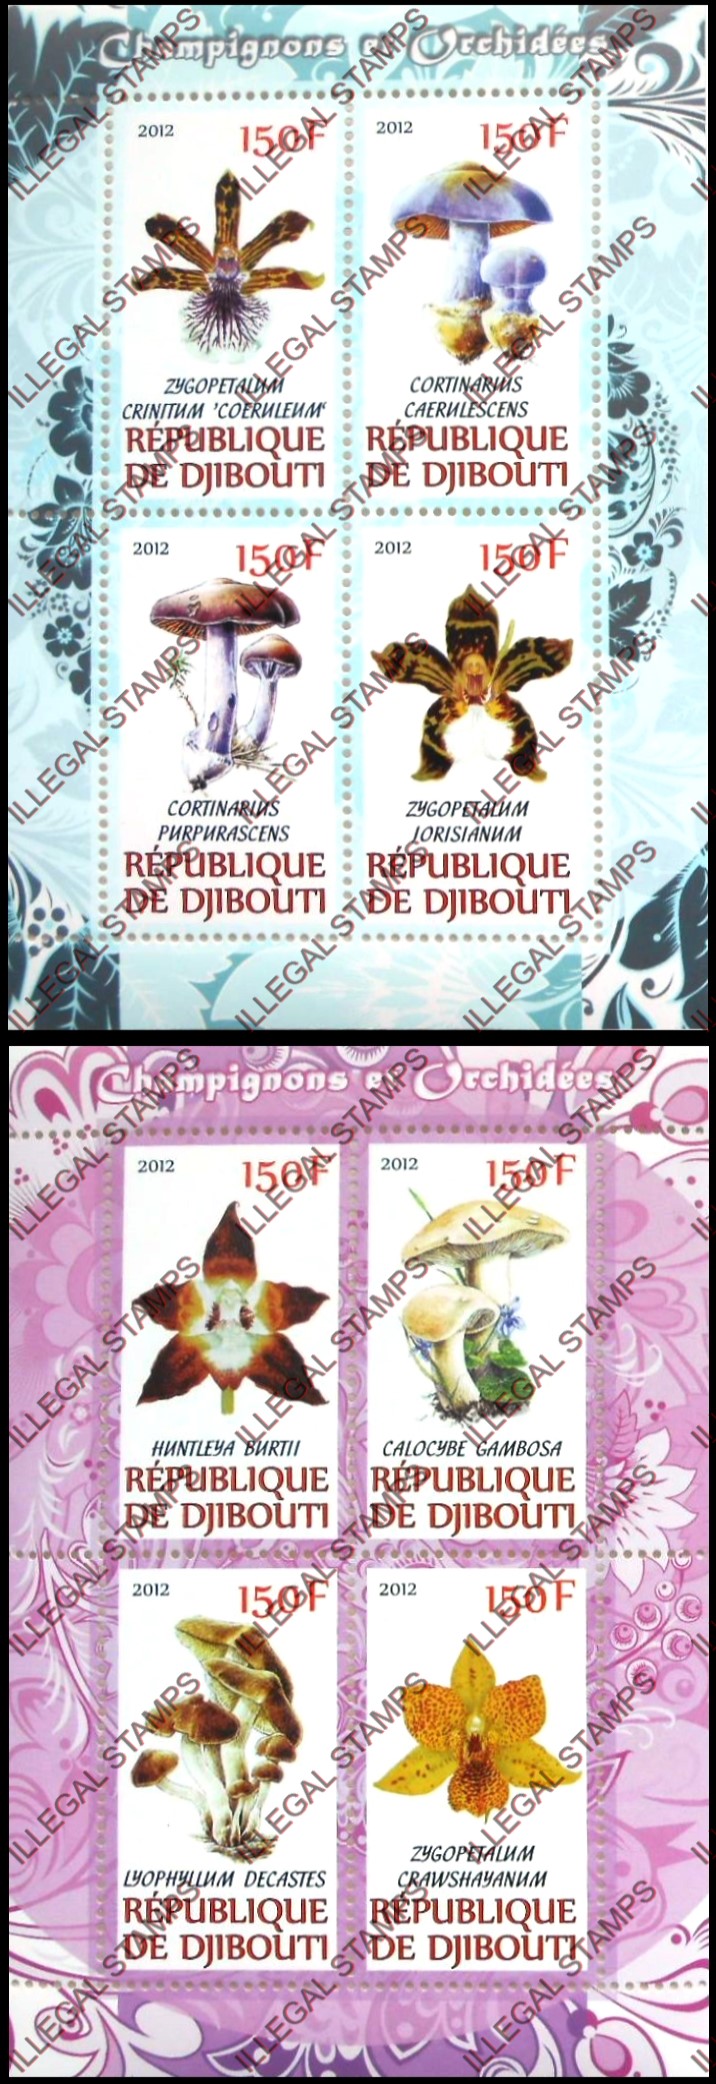 Djibouti 2012 Mushrooms and Orchids Illegal Stamp Souvenir Sheets of 4